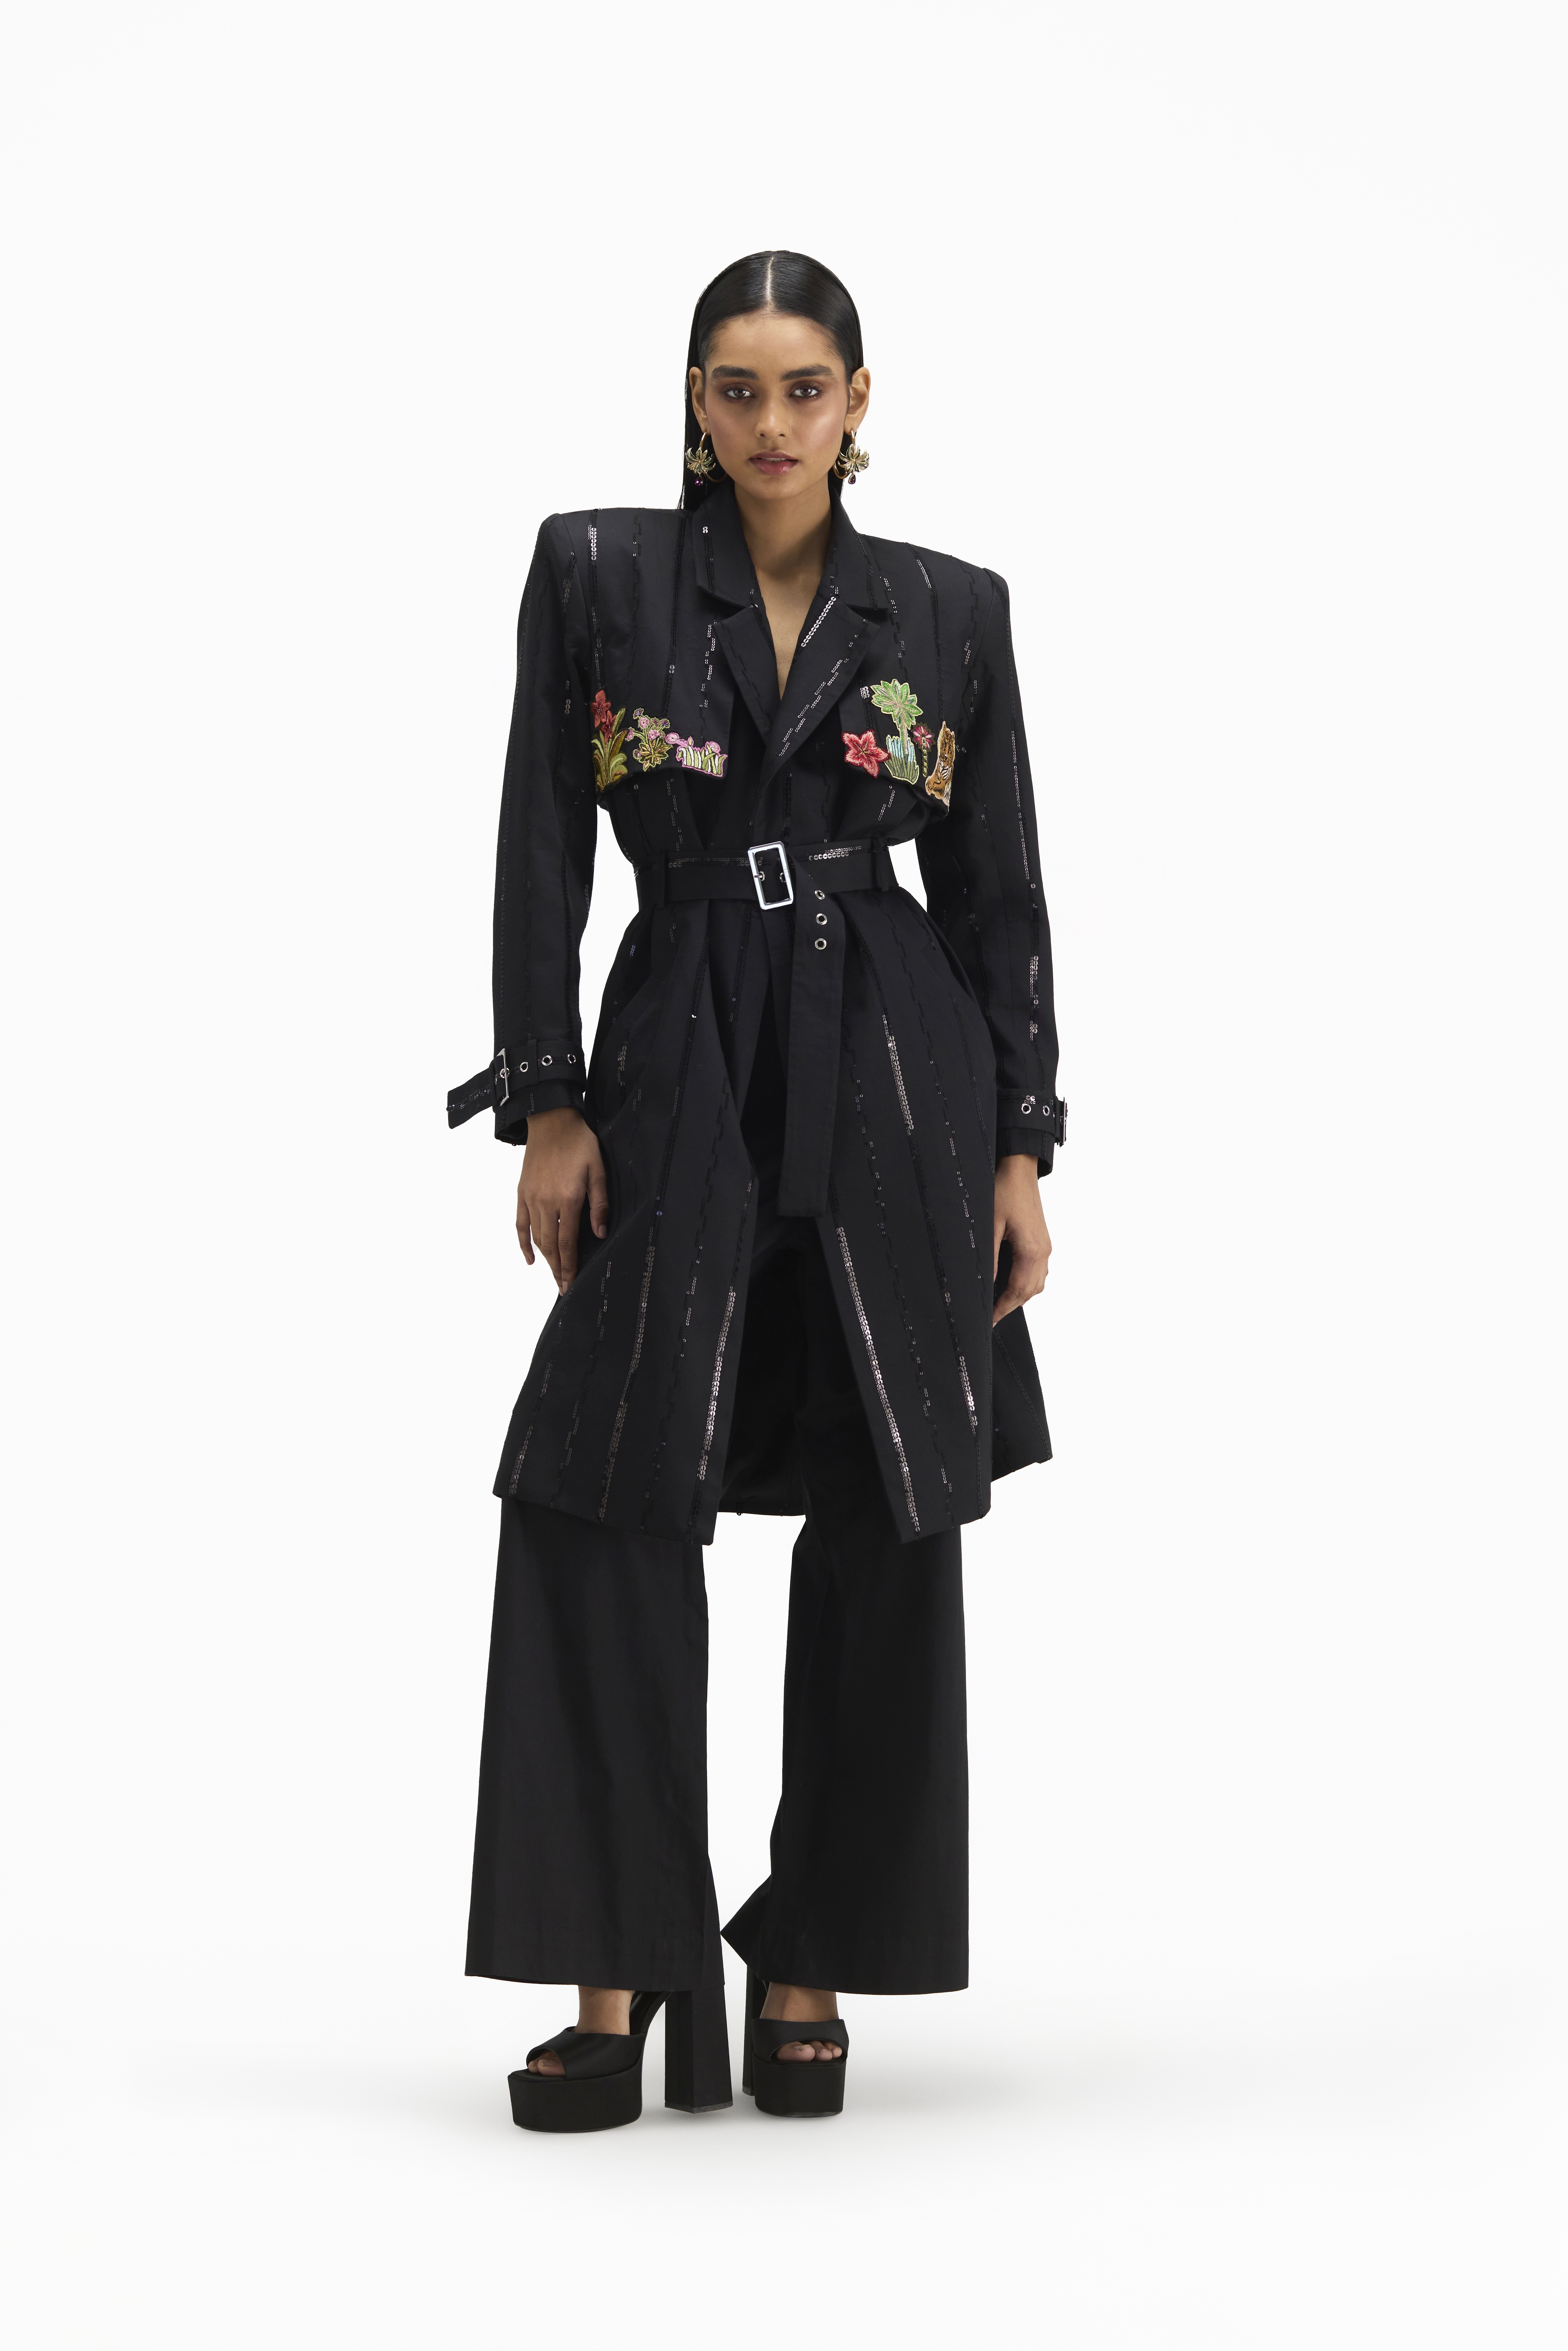 Women's Black Egyptian giza cotton Carnation patched embroidered Trench